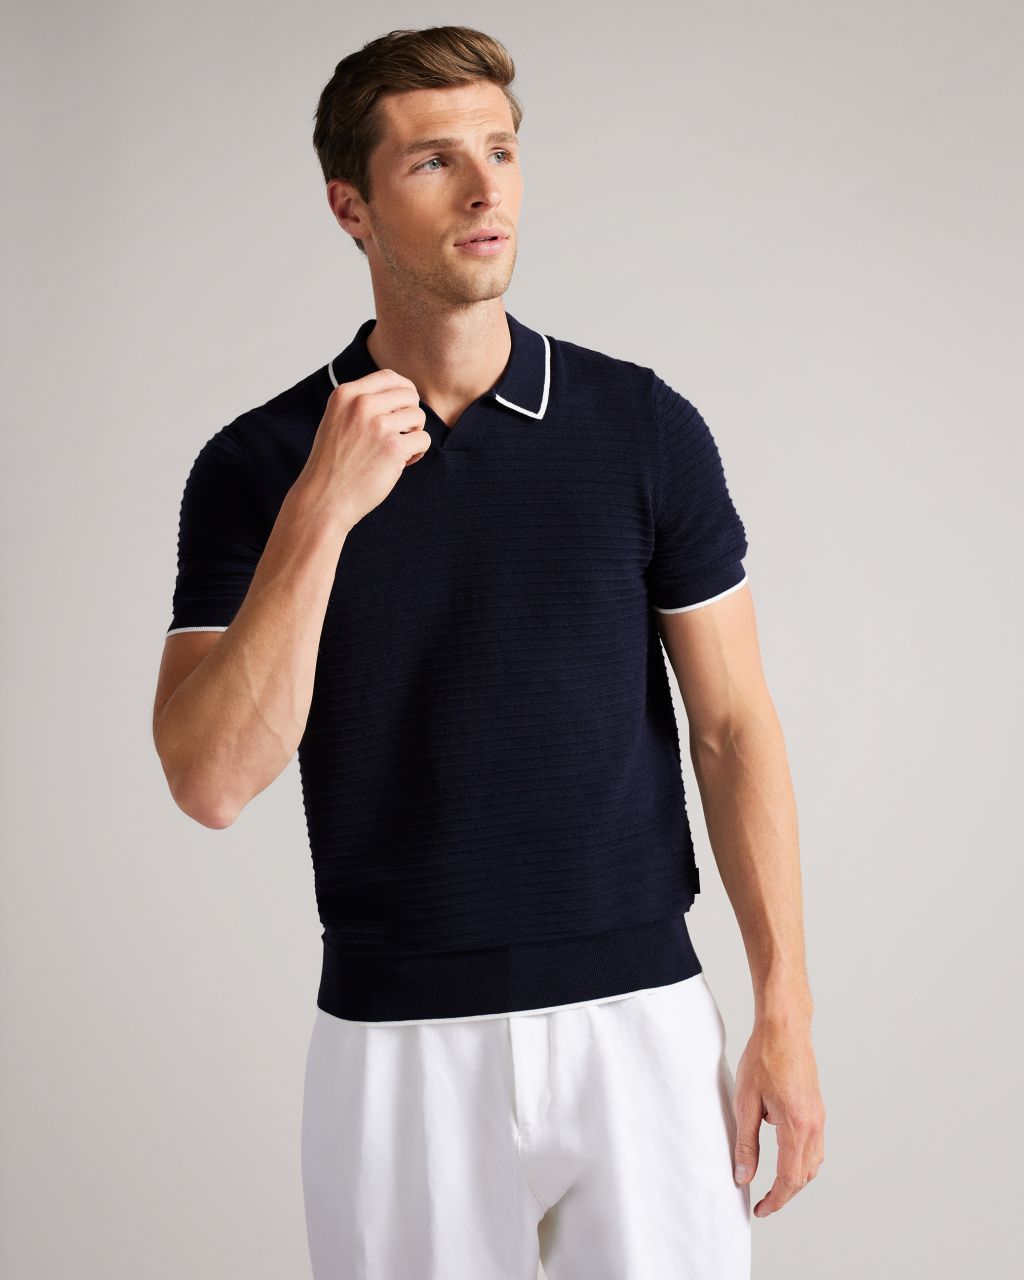 Textured Stripe Knitted Polo Shirt